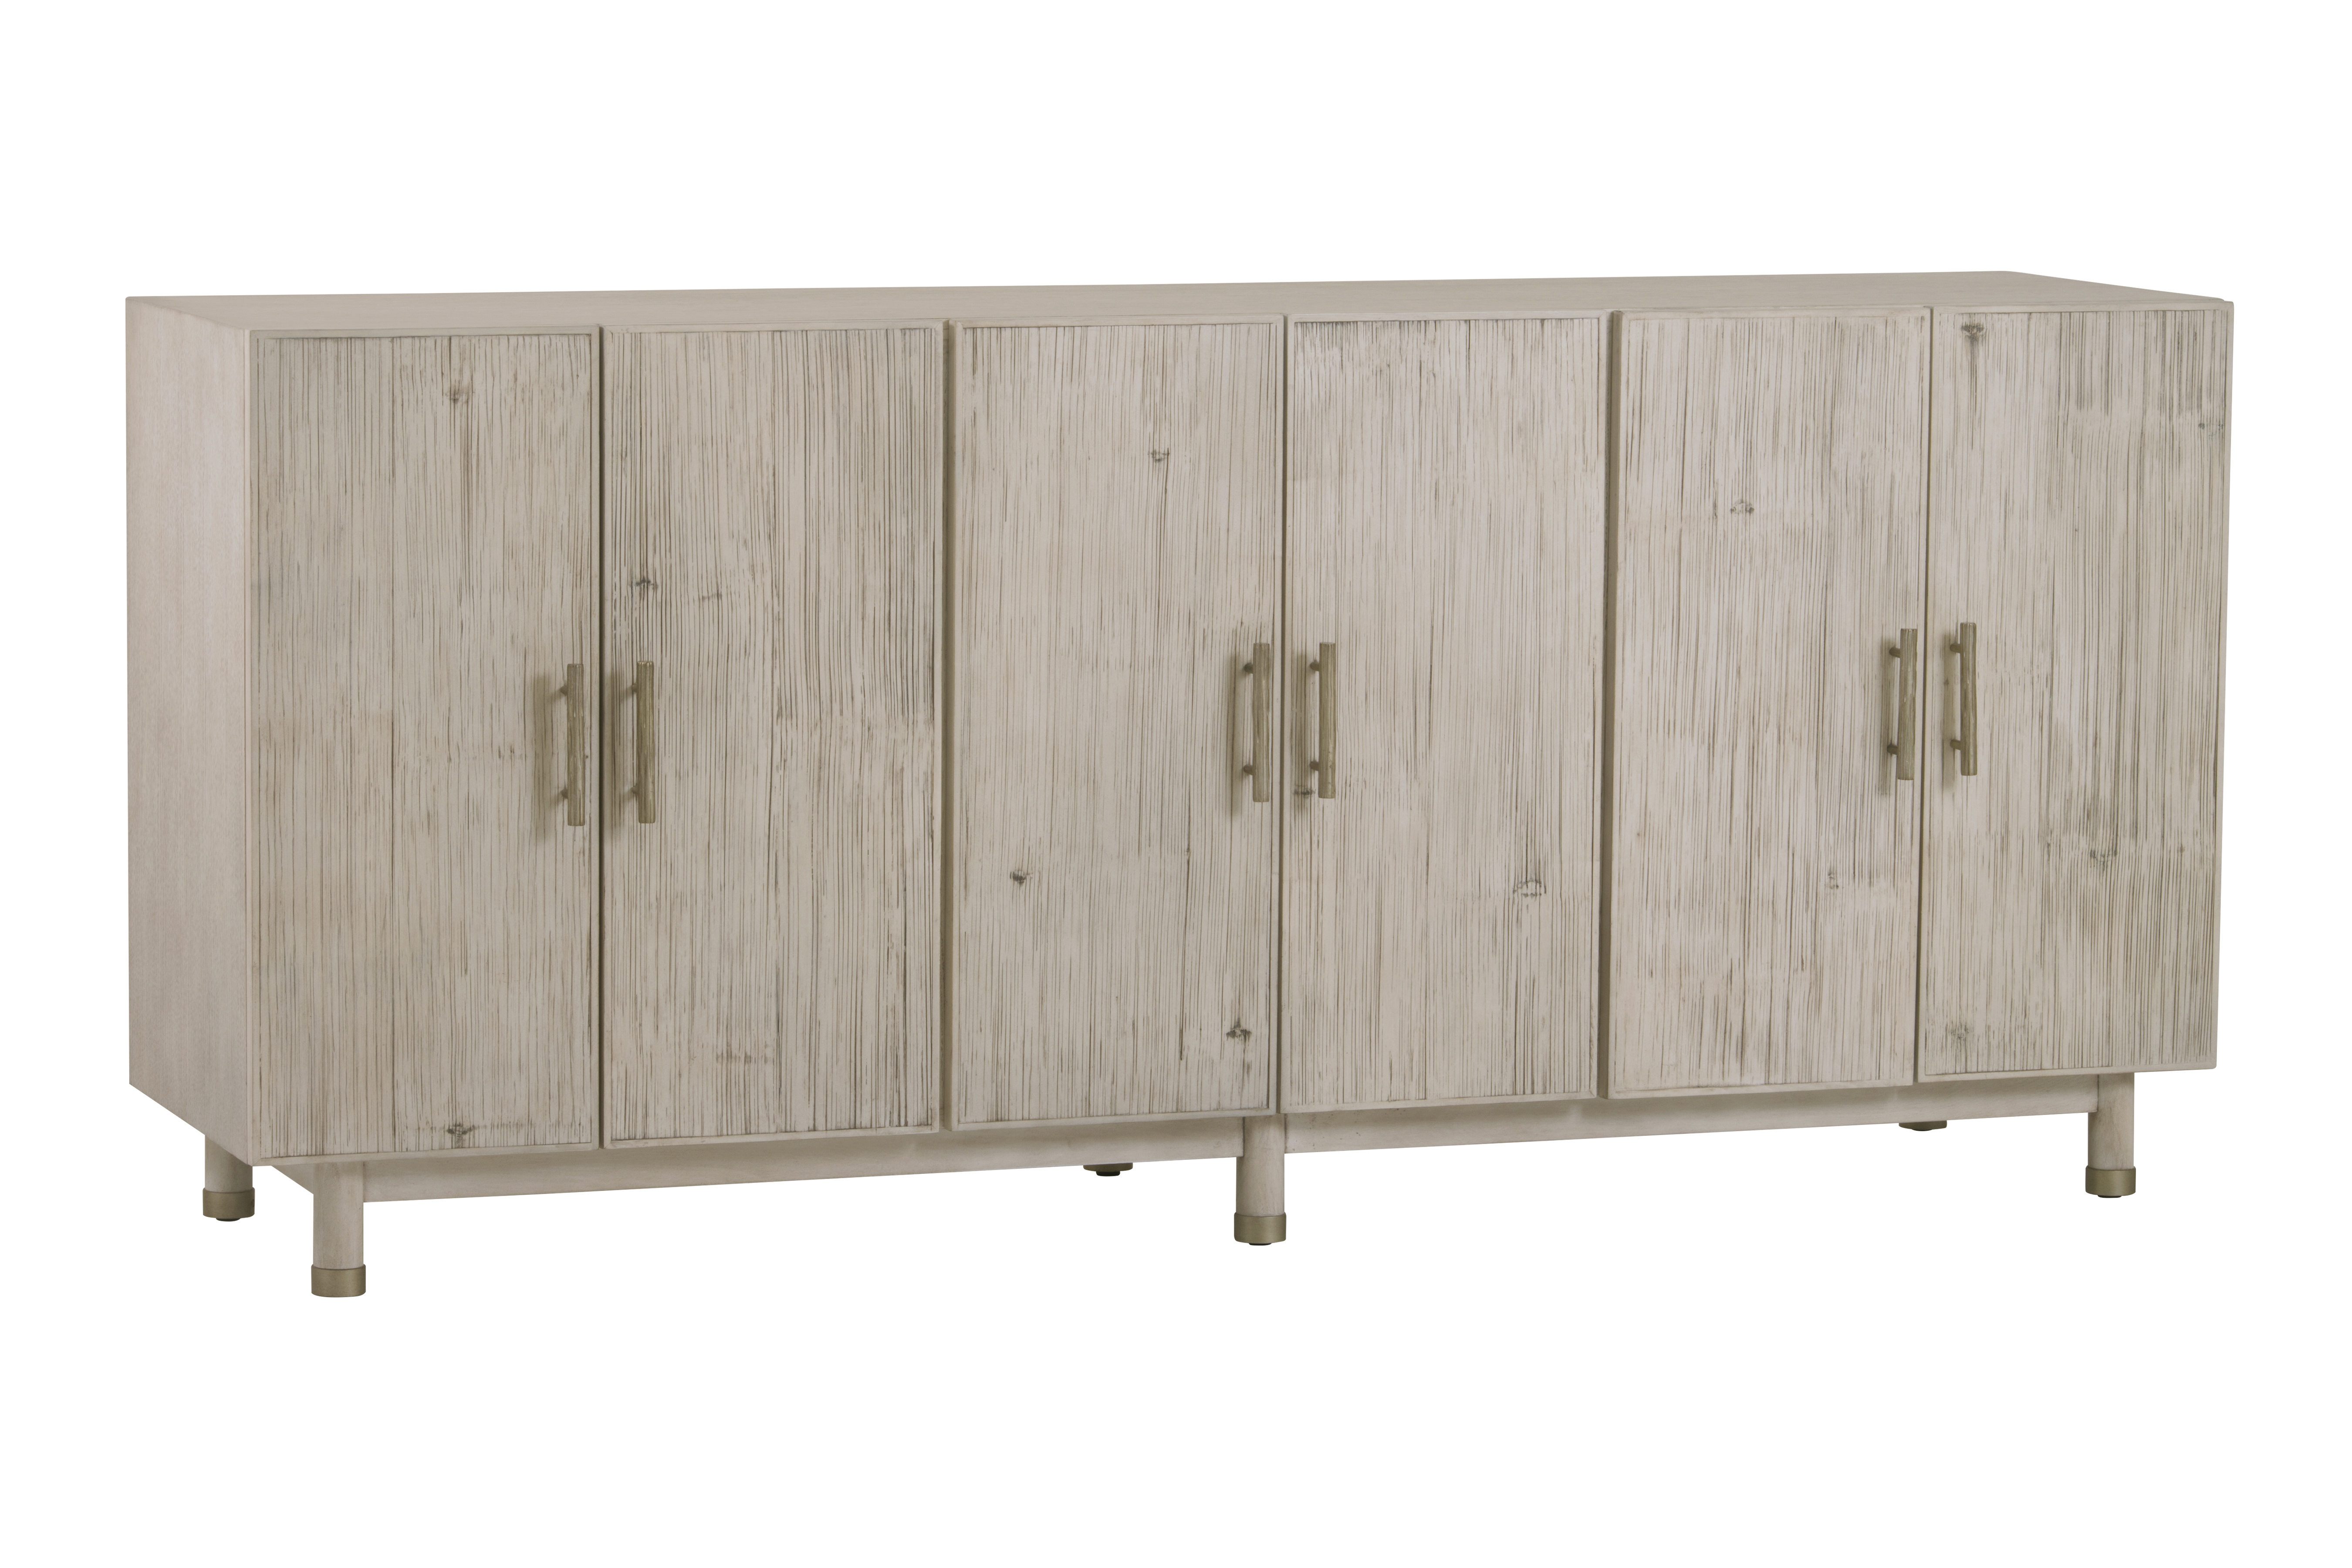 Curate Home Bamboo credenza